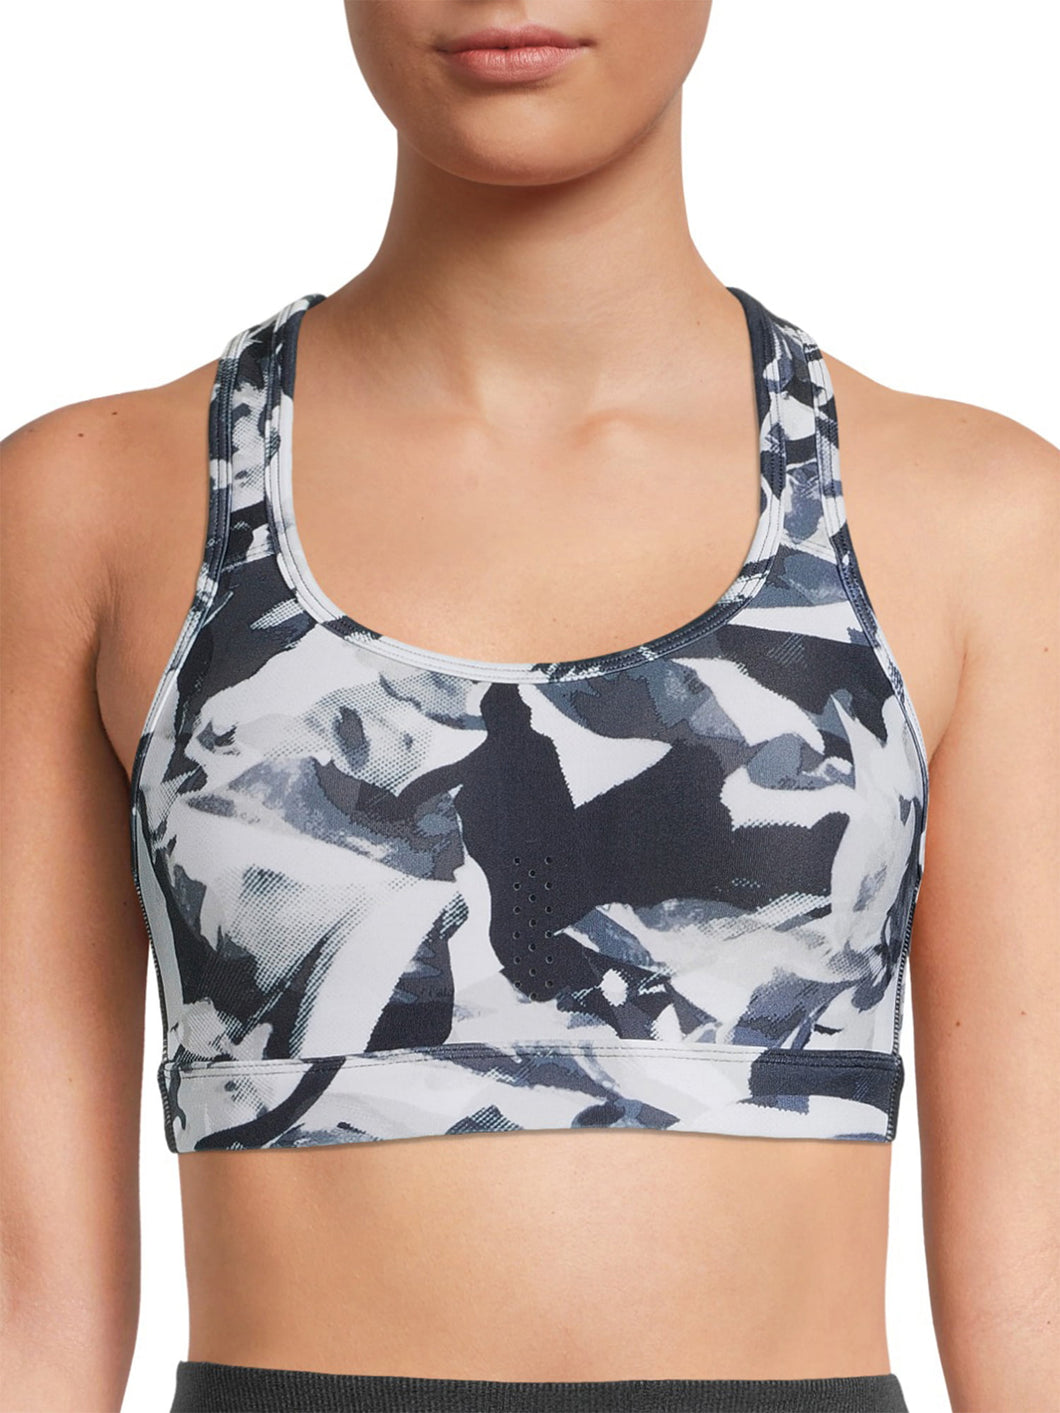 Avia Women's Molded Cup Sports Bra - Black and White, XL